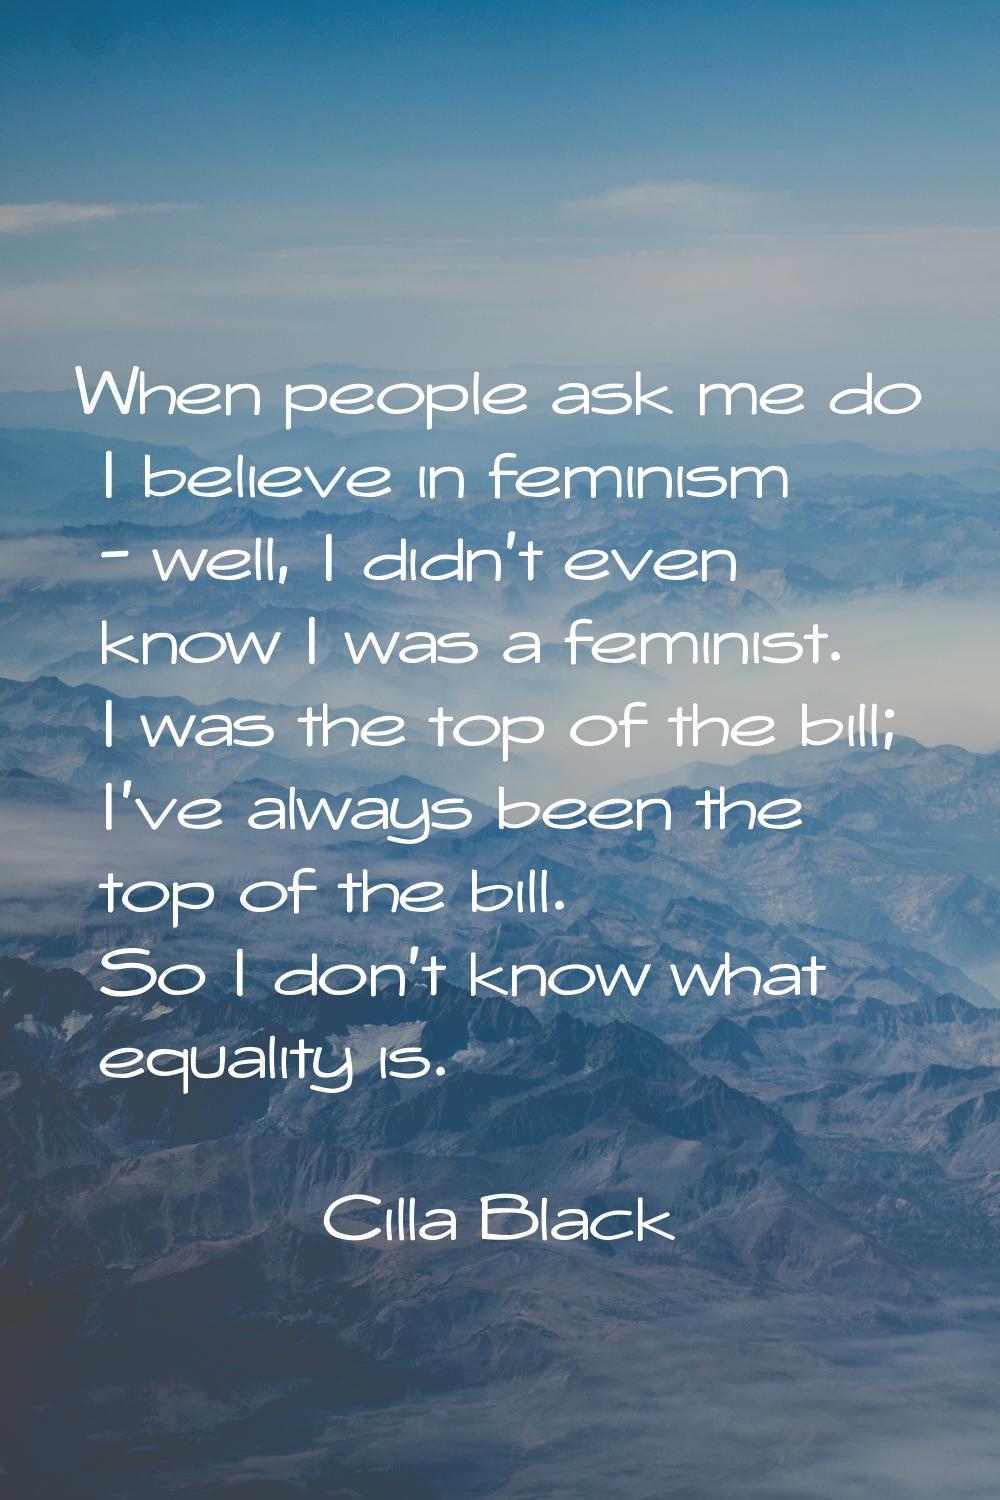 When people ask me do I believe in feminism - well, I didn't even know I was a feminist. I was the 